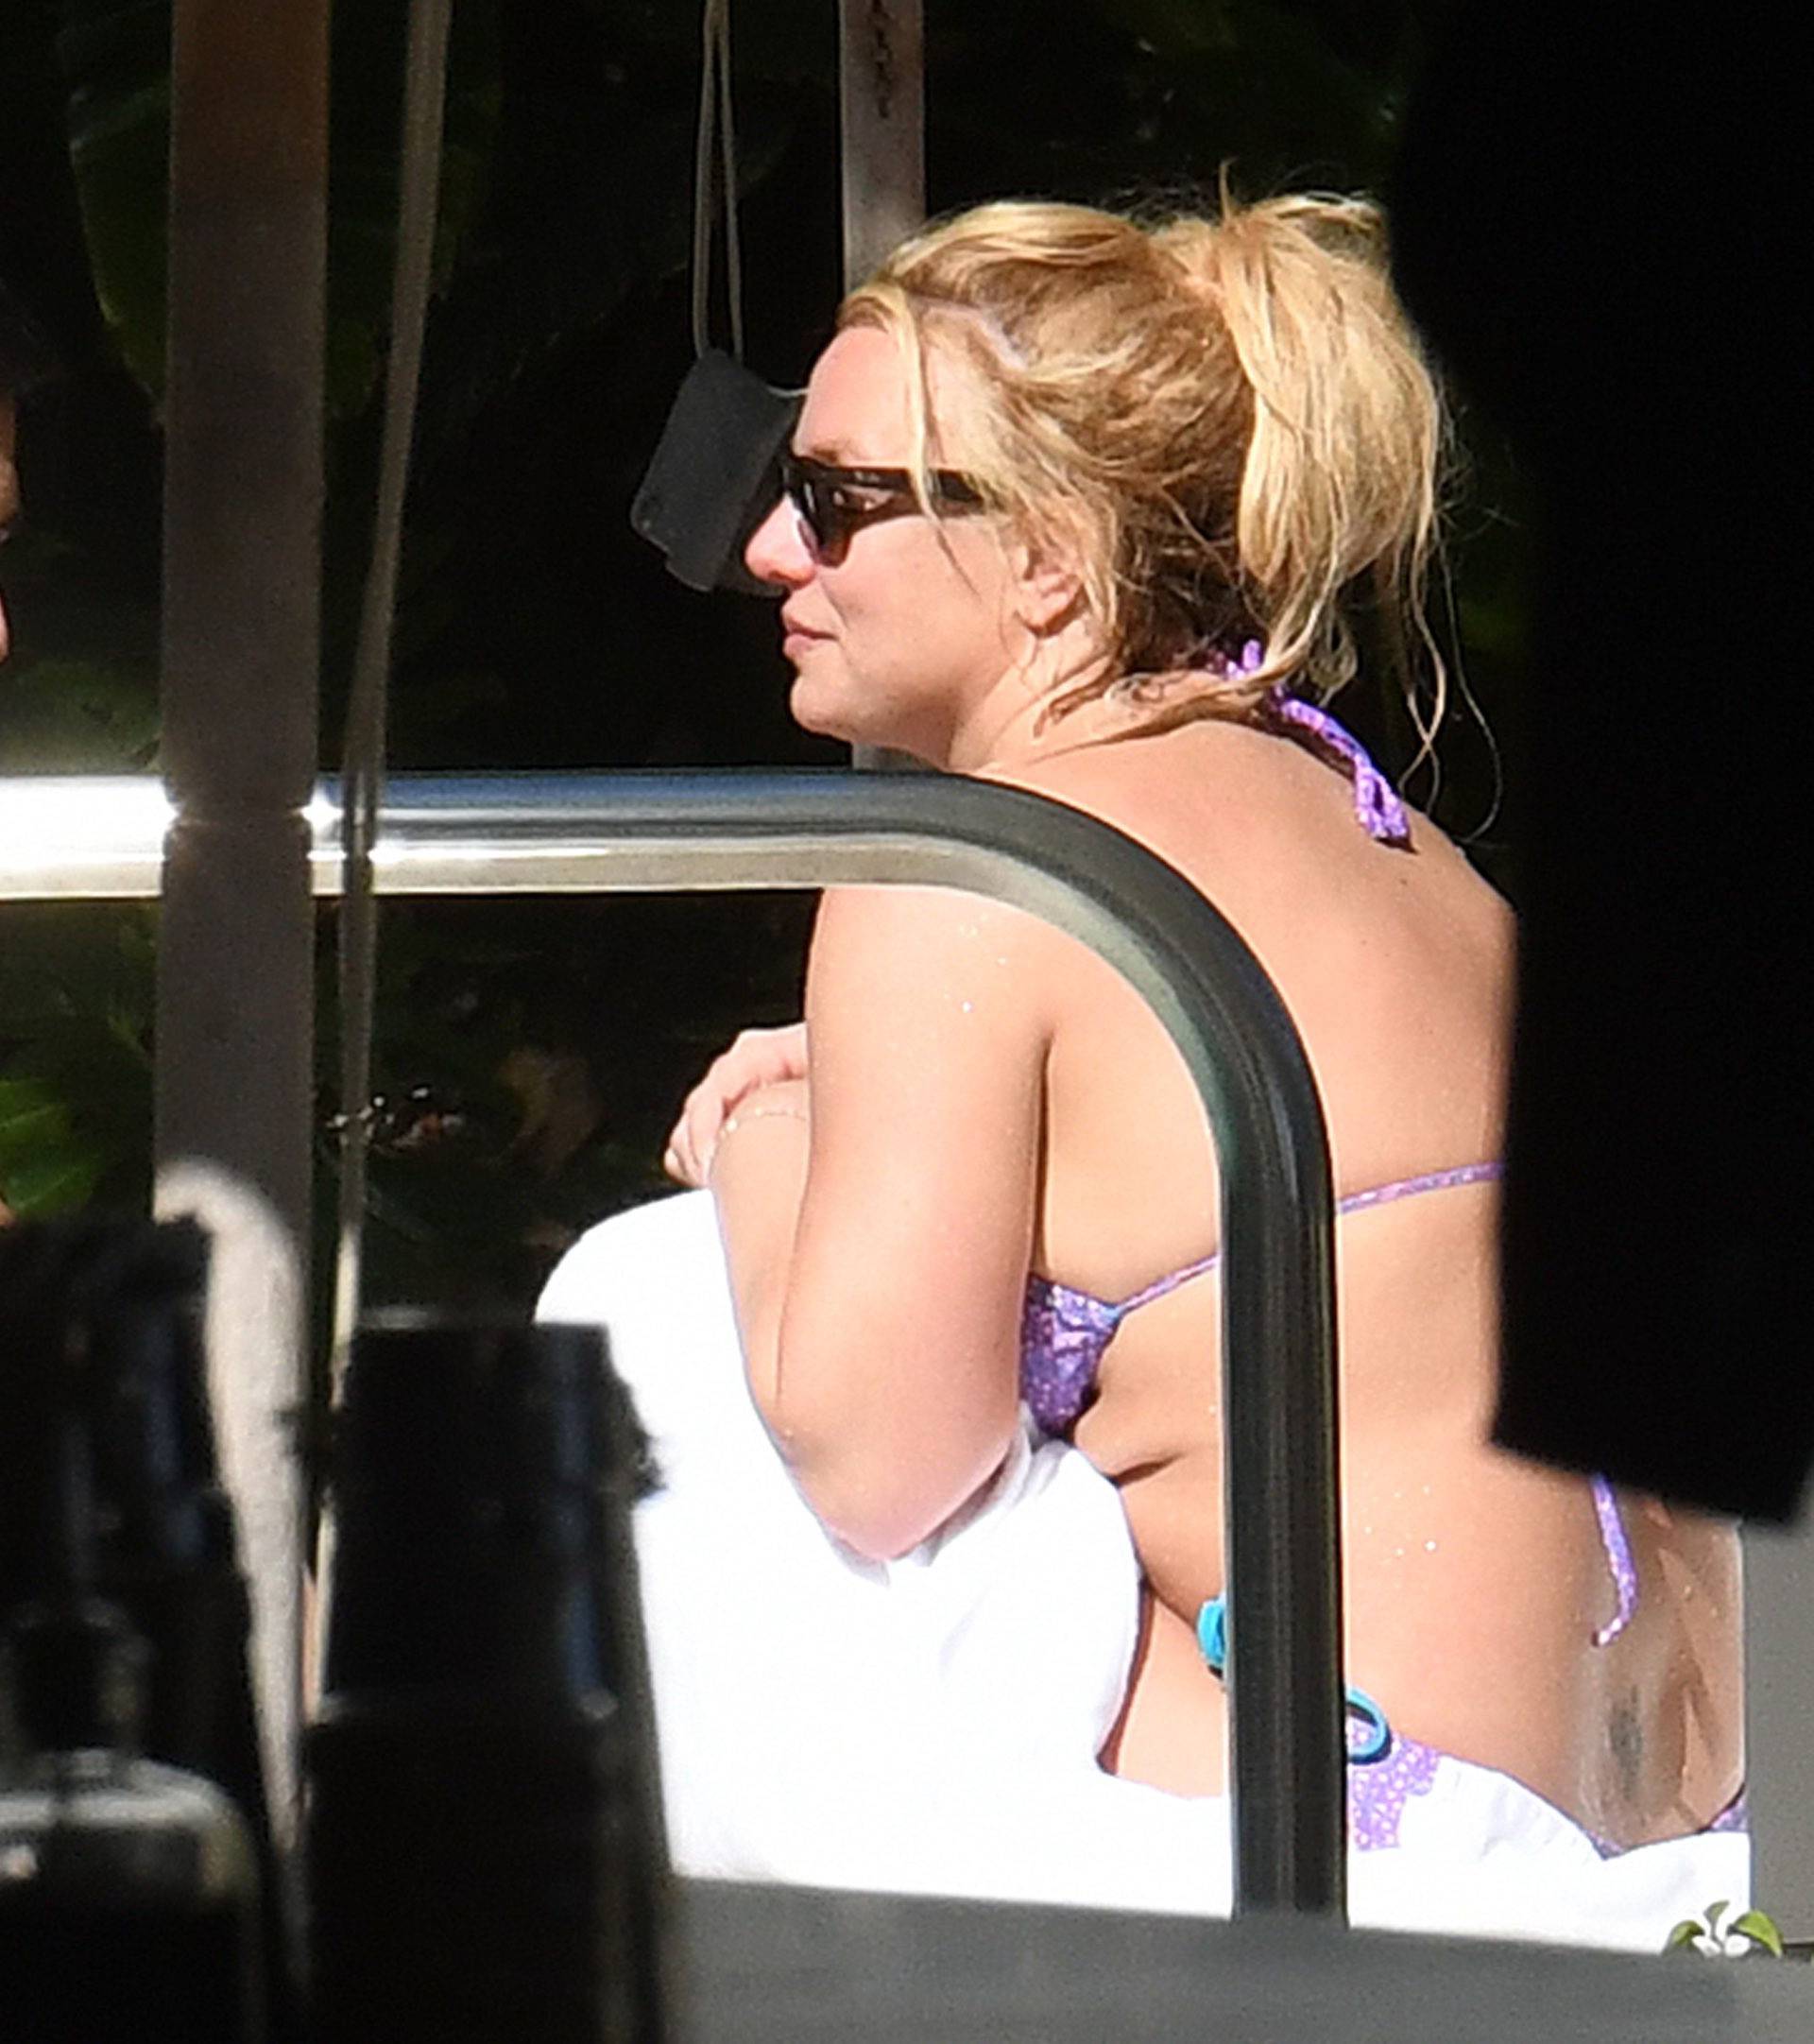 *PREMIUM EXCLUSIVE* Britney Spears takes a dip in the pool after arriving in Miami to celebrate her 38th birthday.